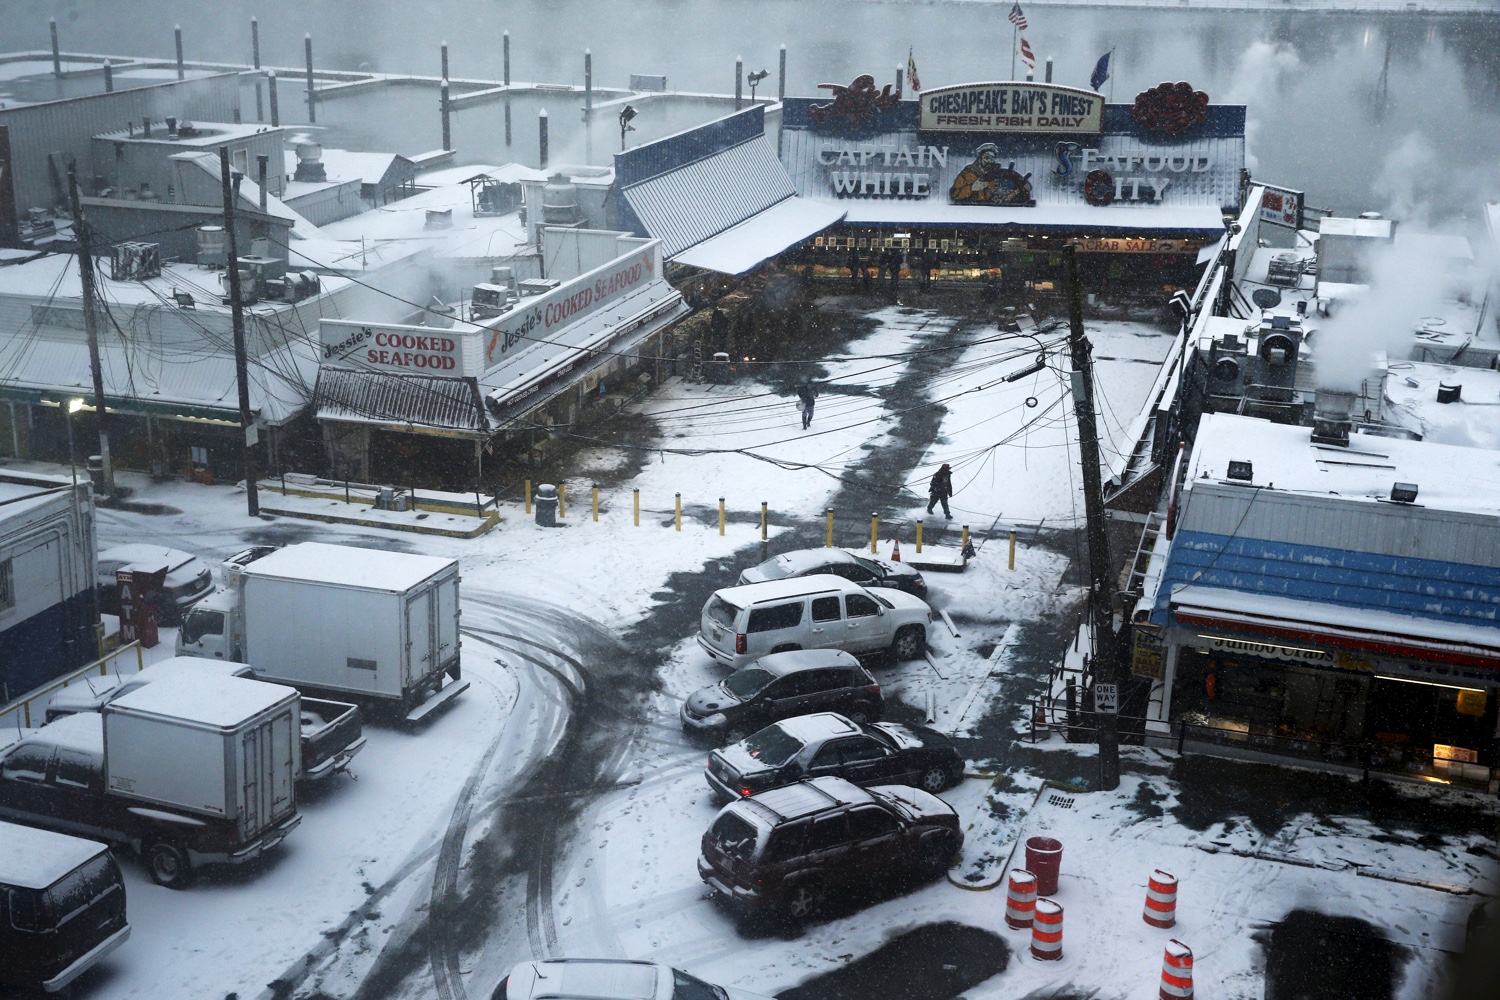 People buy seafood at the Wharf as snow begins to fall in DC, Jan 22 2016. REUTERS